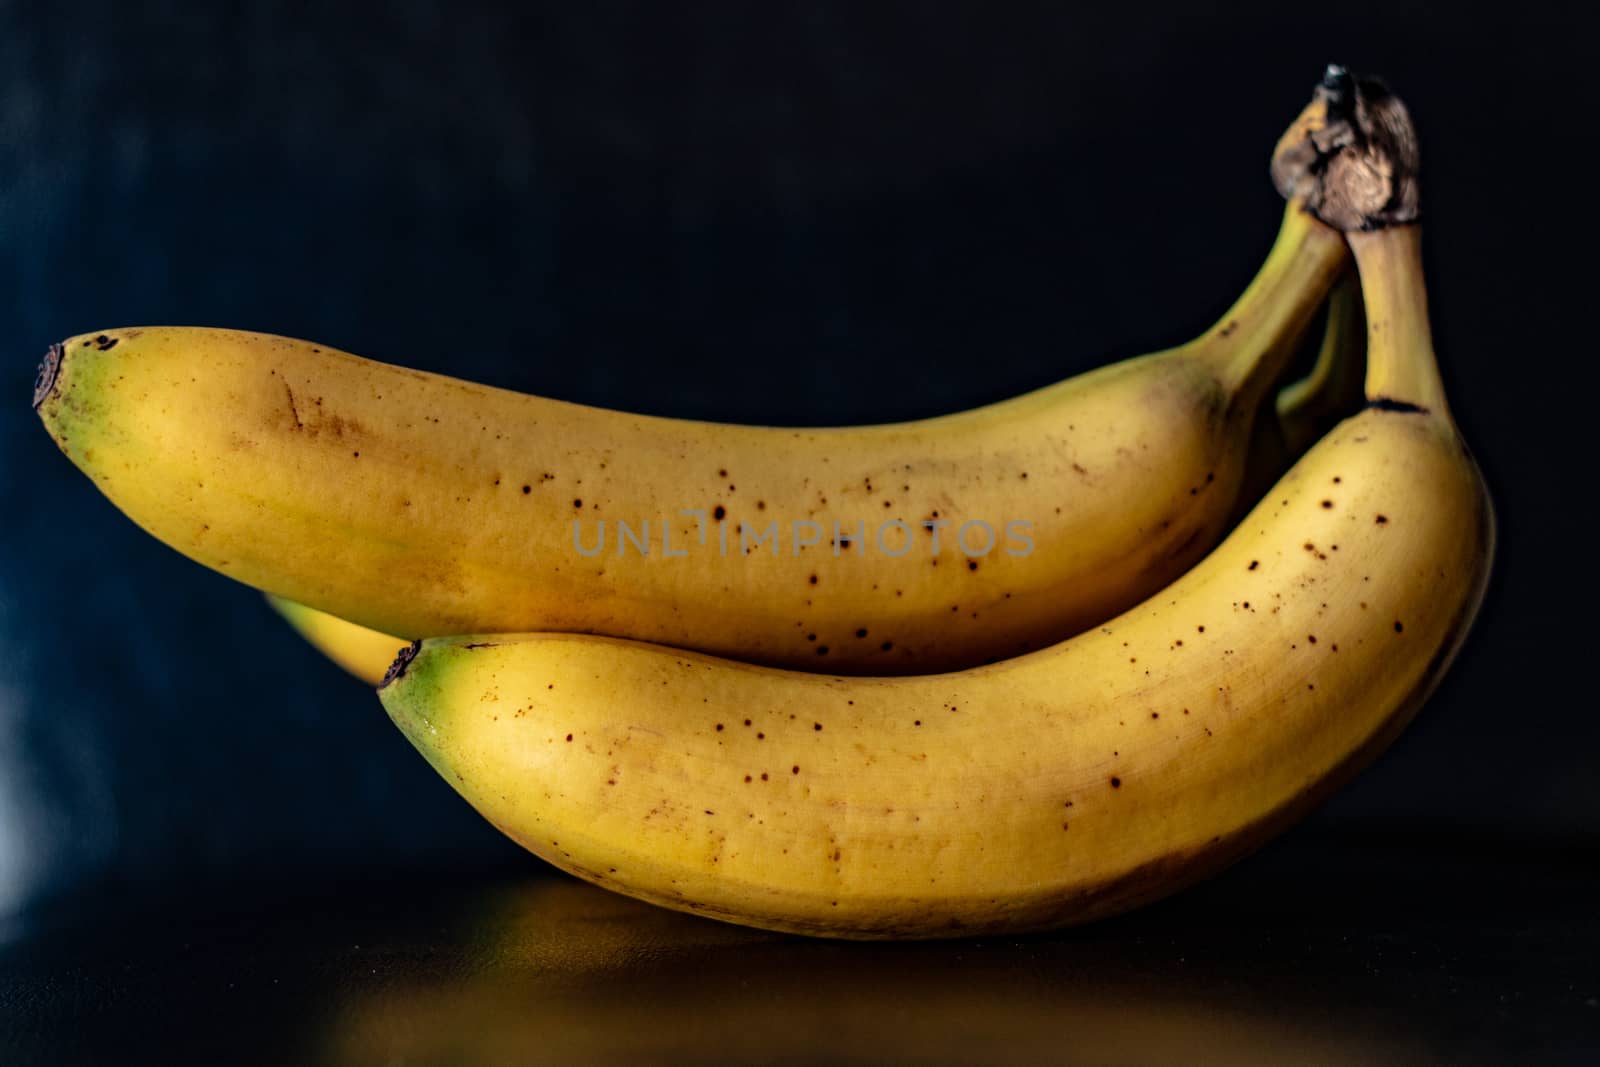 Ripe banana group on a black background. Fruit photography by mynewturtle1